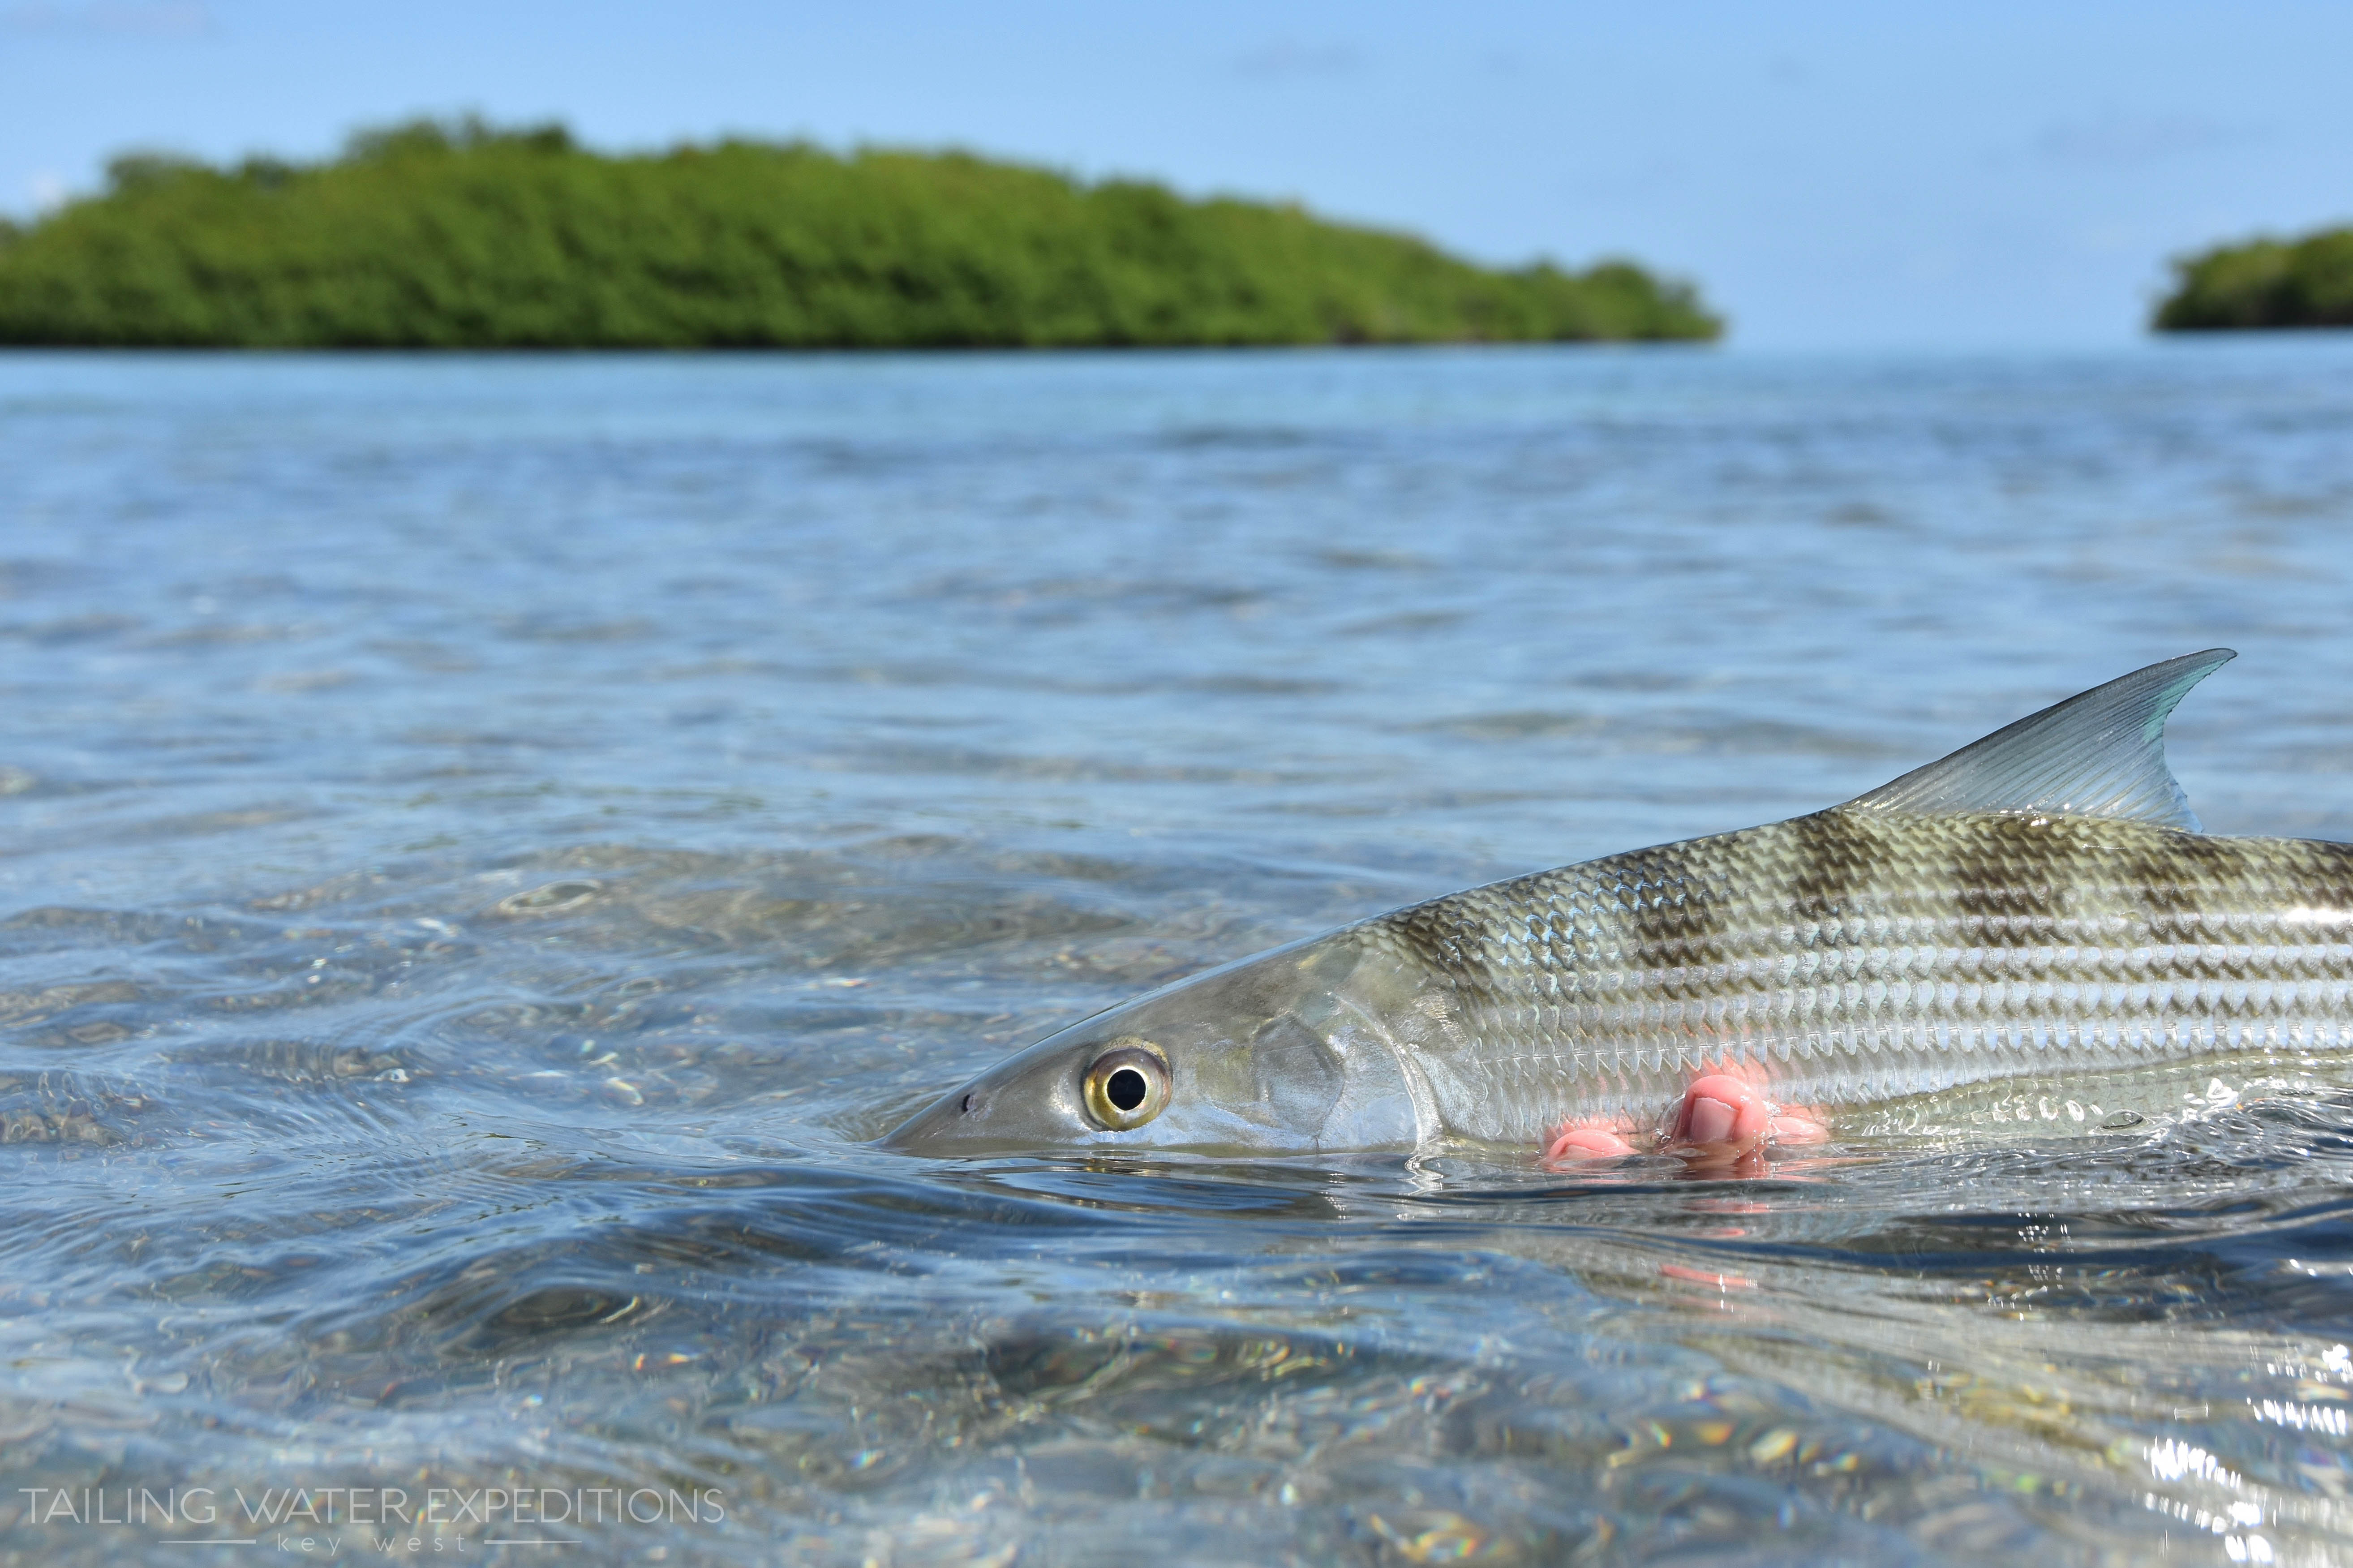 Bonefish are a very sought after sportfish in the Florida Keys